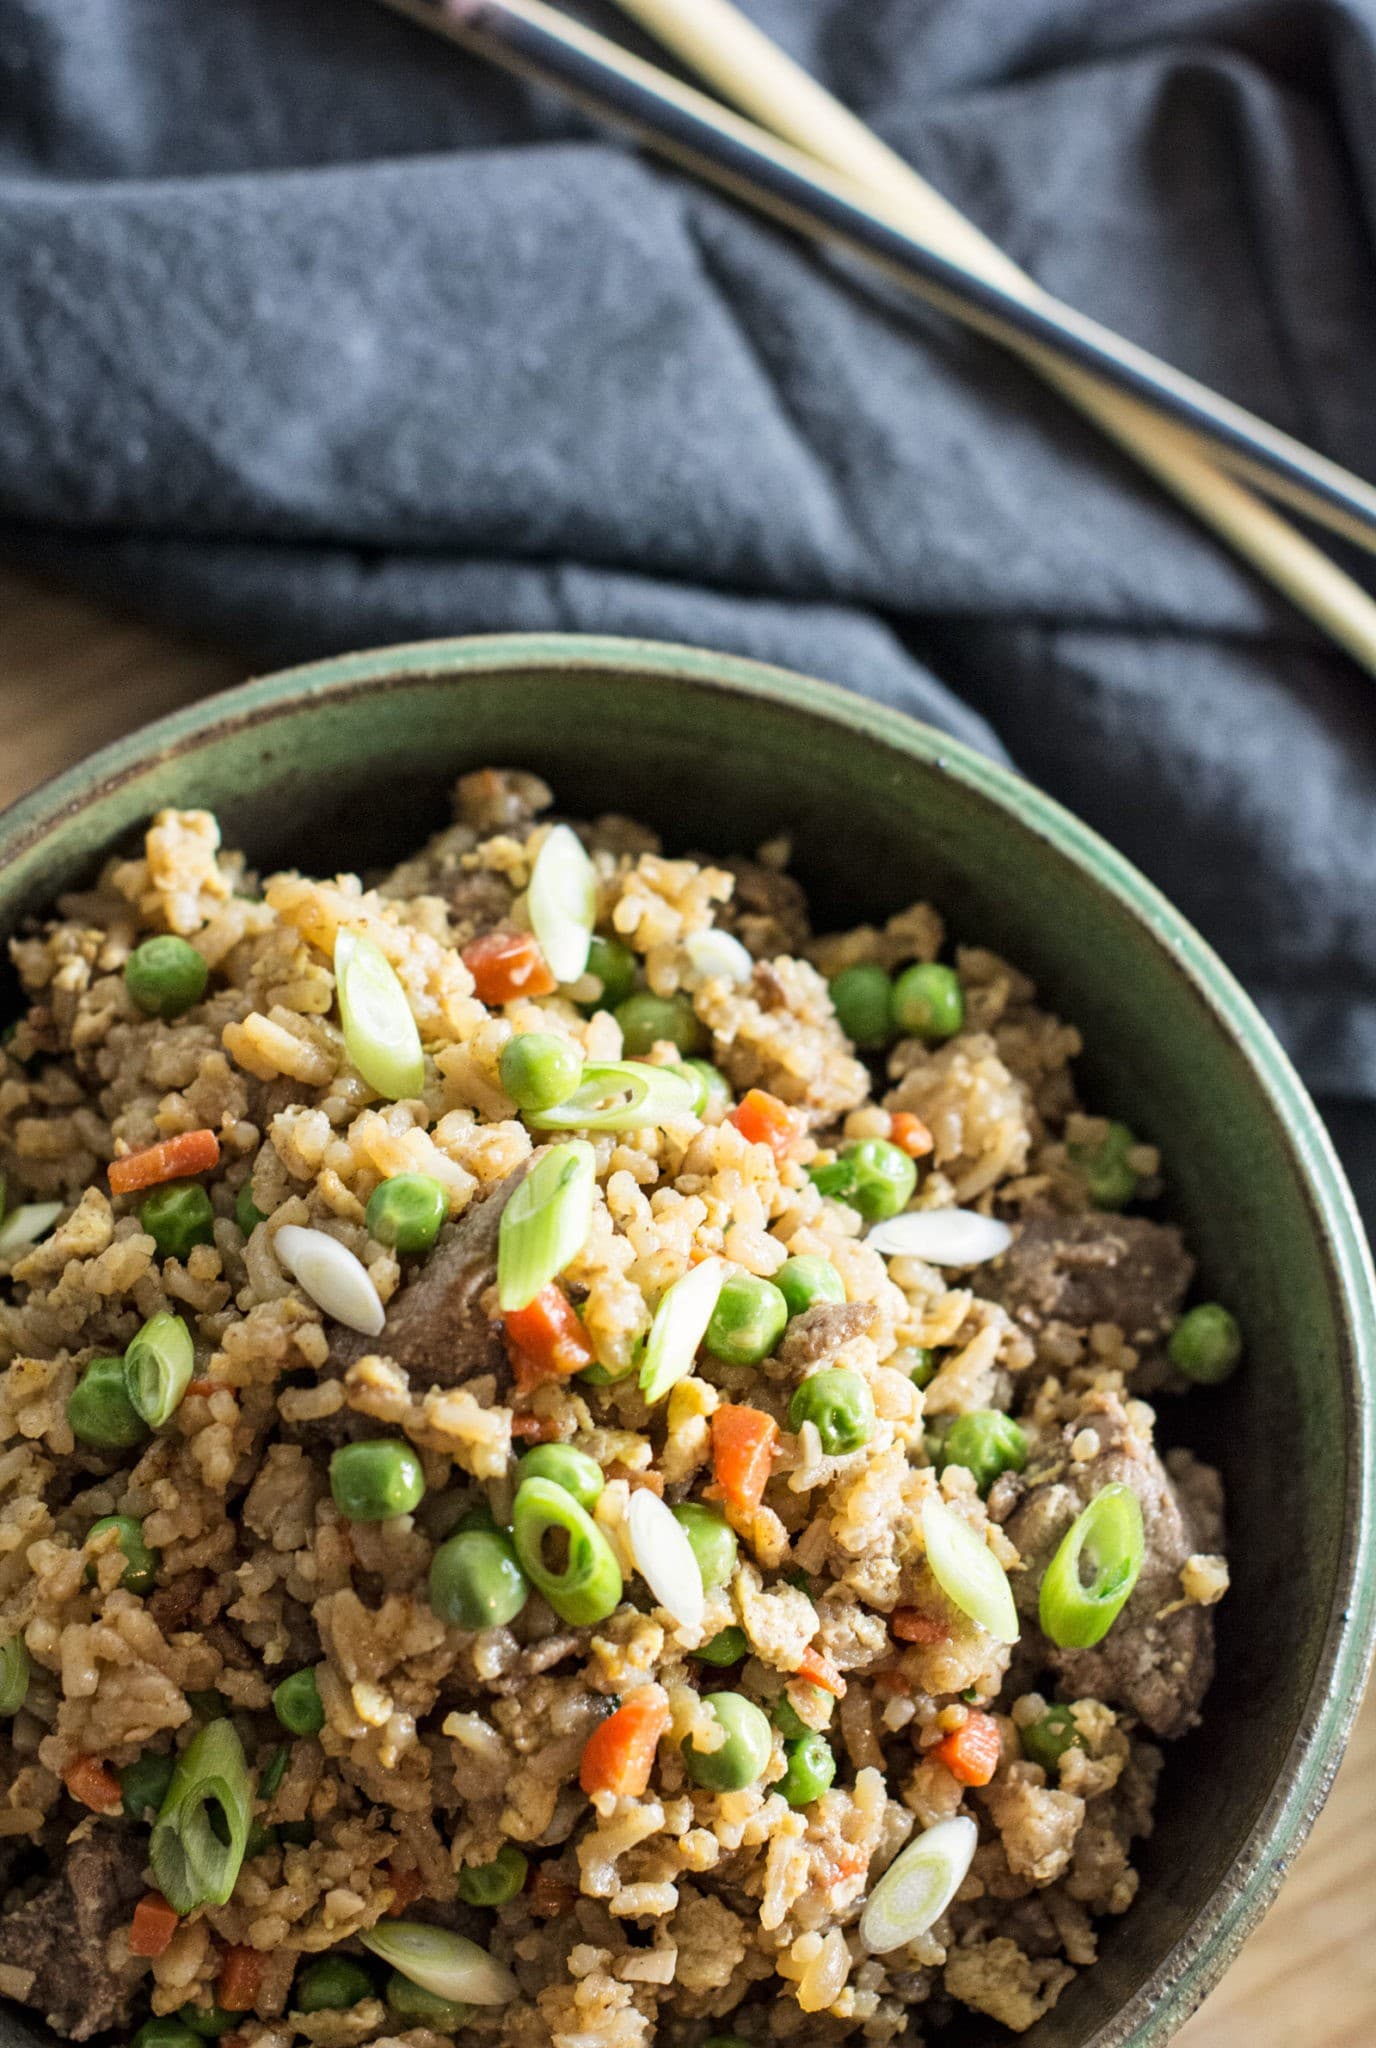 Pork Fried Rice is so easy to make always taste great. Make you own take out favorite at home! Recipe @LittleFiggyFood